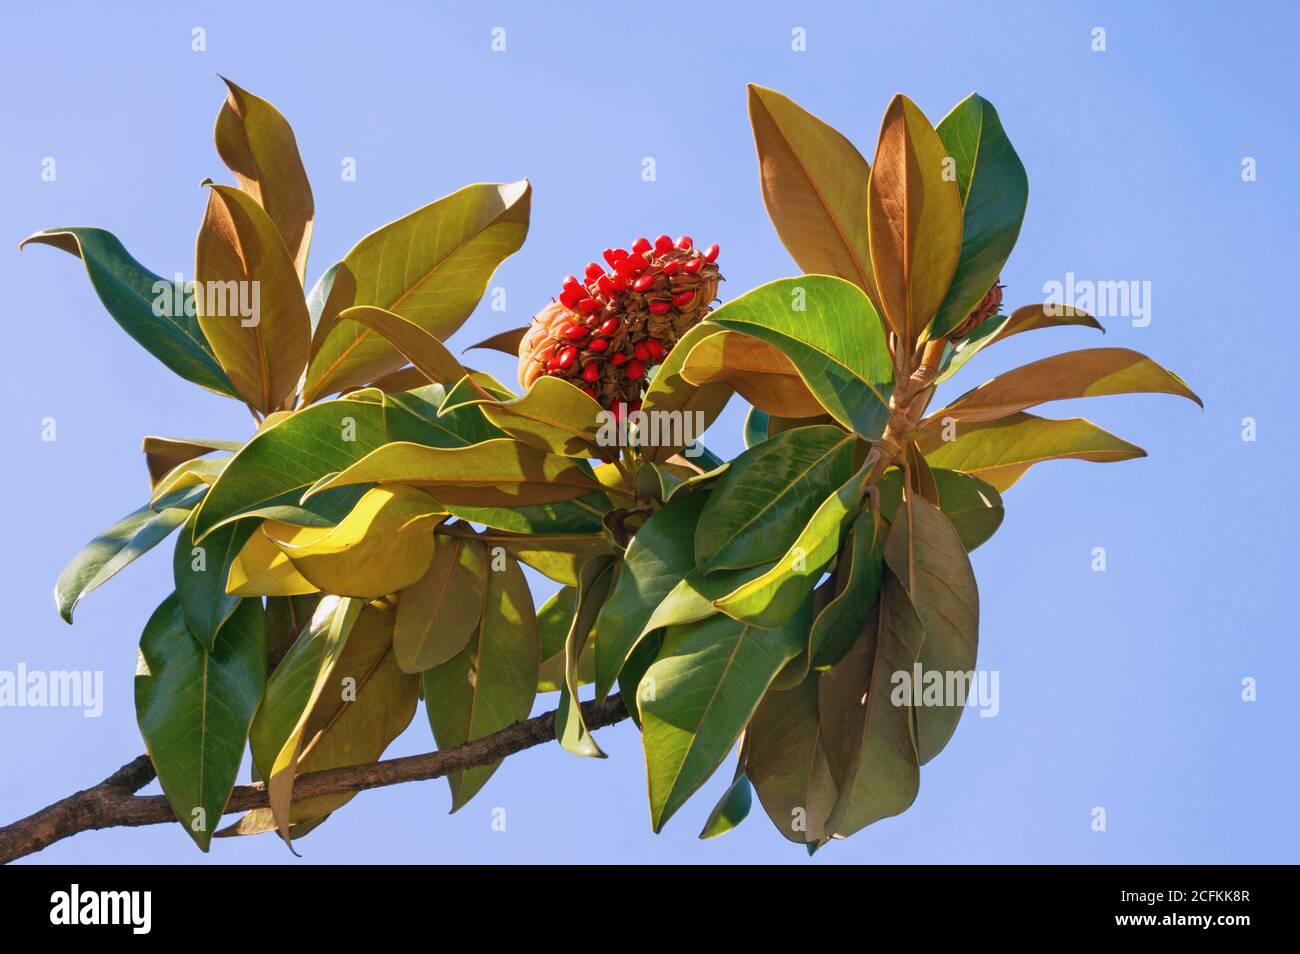 Autumn. Branch of  magnolia tree ( Magnolia grandiflora ) with leaves and one fruit with seeds against blue sky on sunny day Stock Photo